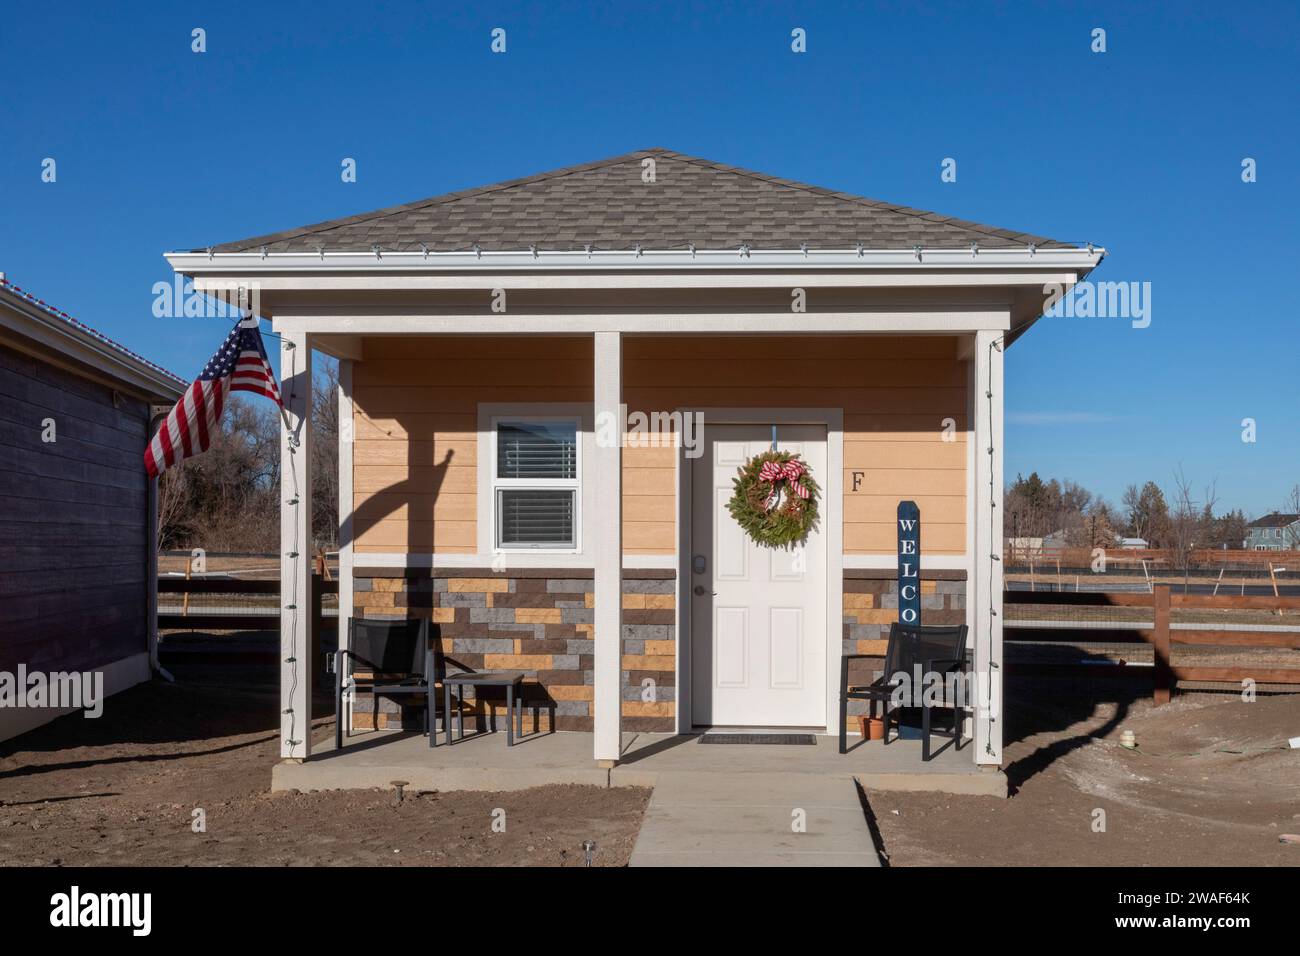 Longmont, Colorado - The Veterans Community Project is building tiny homes for homeless veterans. The development has 26 homes, ranging from 240 squar Stock Photo